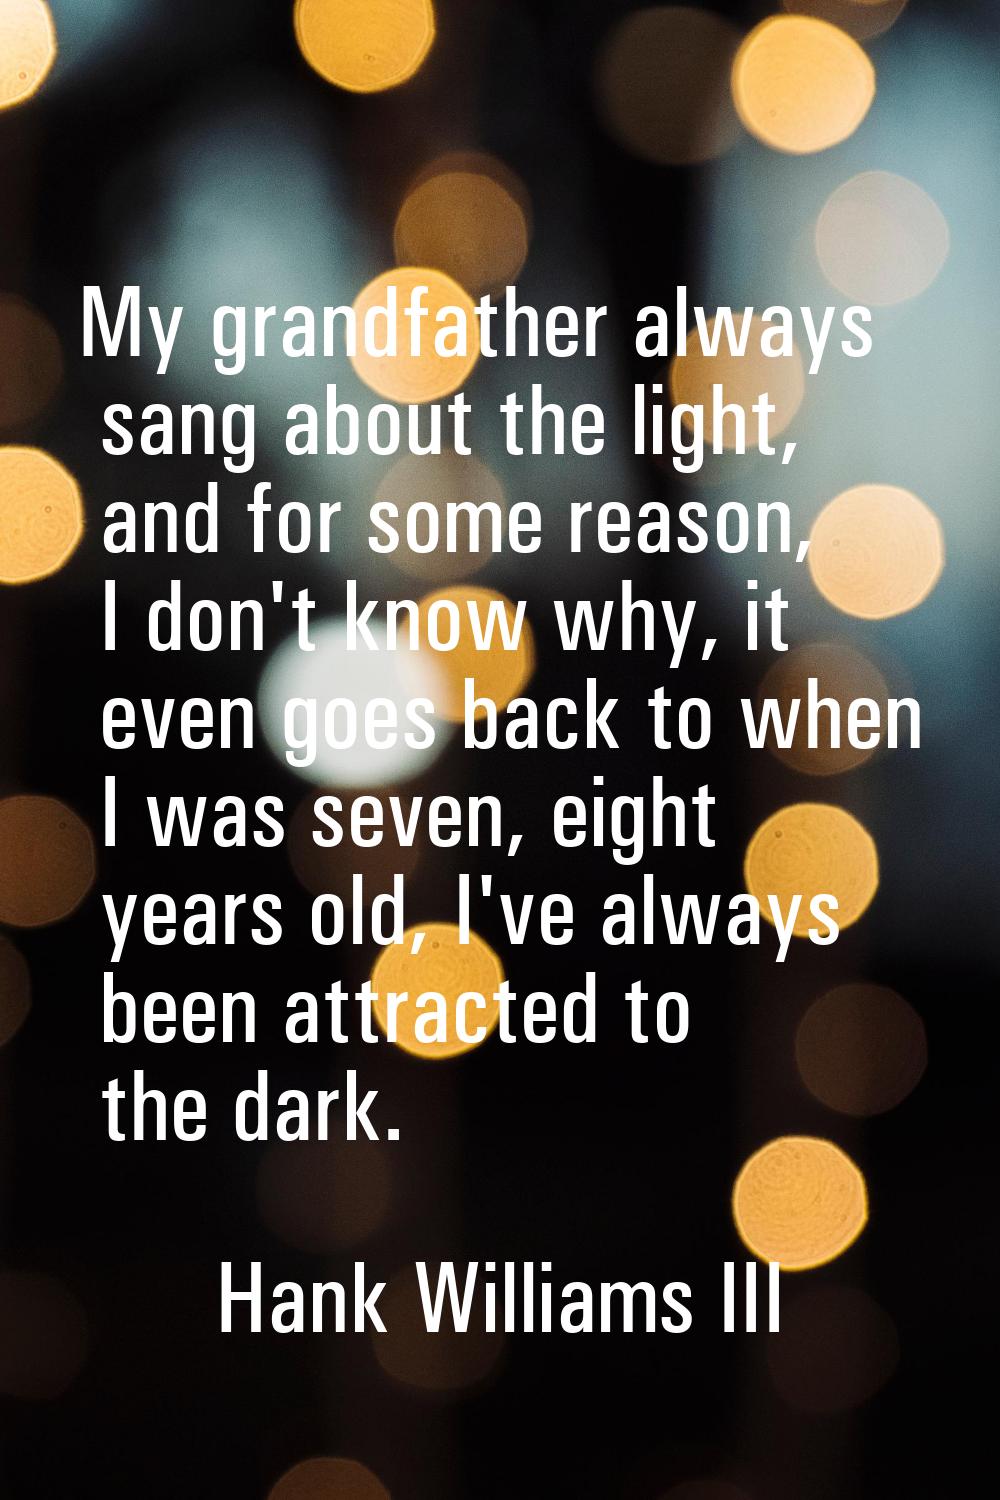 My grandfather always sang about the light, and for some reason, I don't know why, it even goes bac